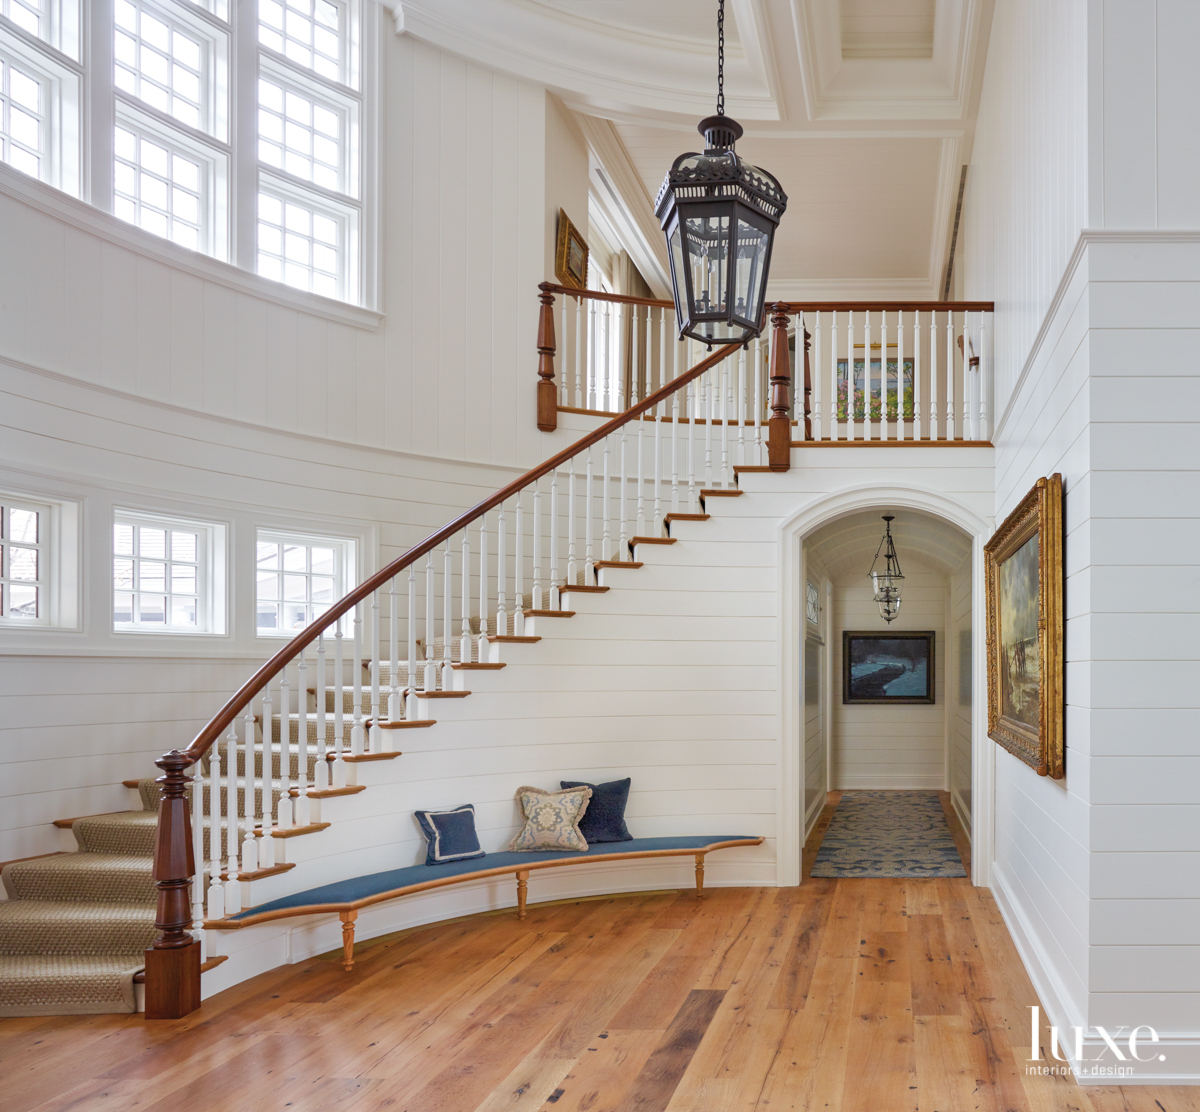 The home entry has beadboard and shiplap throughout.